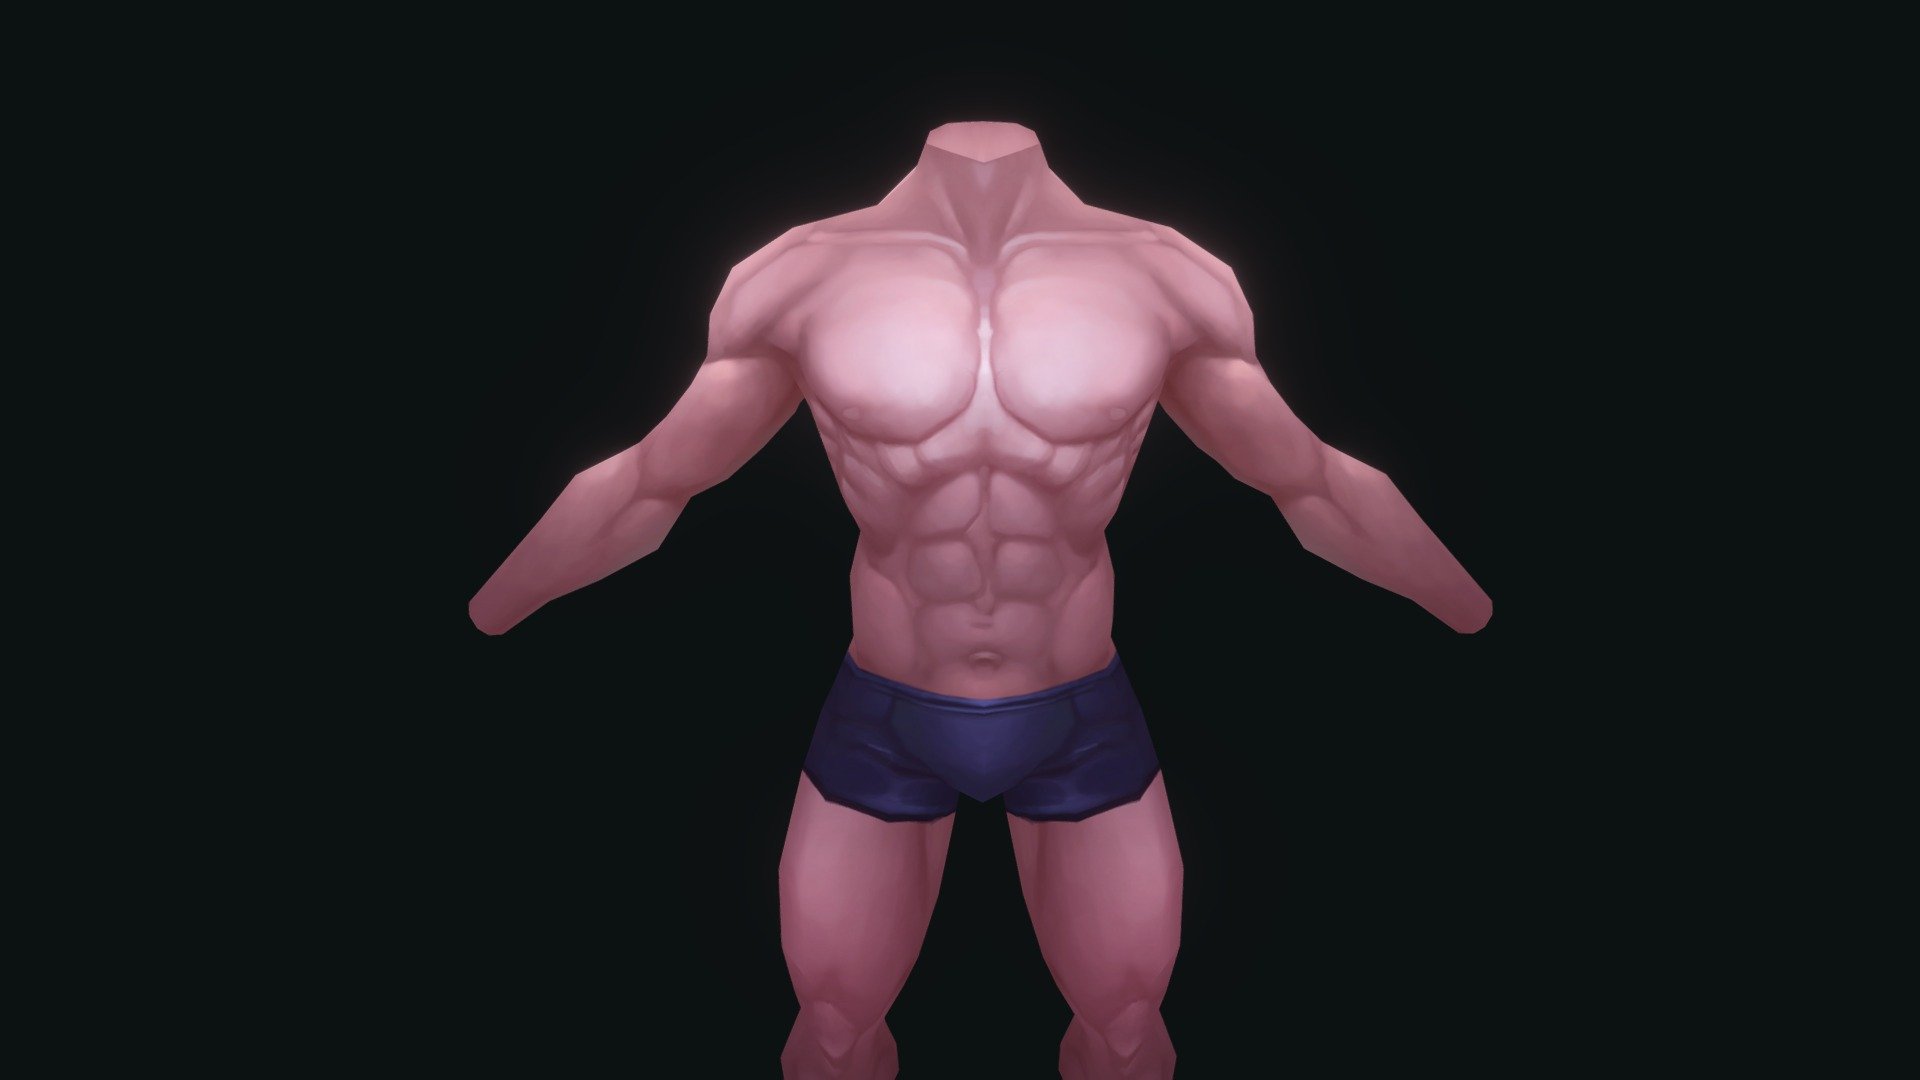 Male texture study in low poly model for games. used programs: Zbrush, Maya, Photoshop, 3dCoat. ( I need to improve a lot, I know haha )
 Download free

Video process: https://youtu.be/UidCL6TBGhE - Male Body - 3D model by Valdson Calado (@valdsonr) 3d model